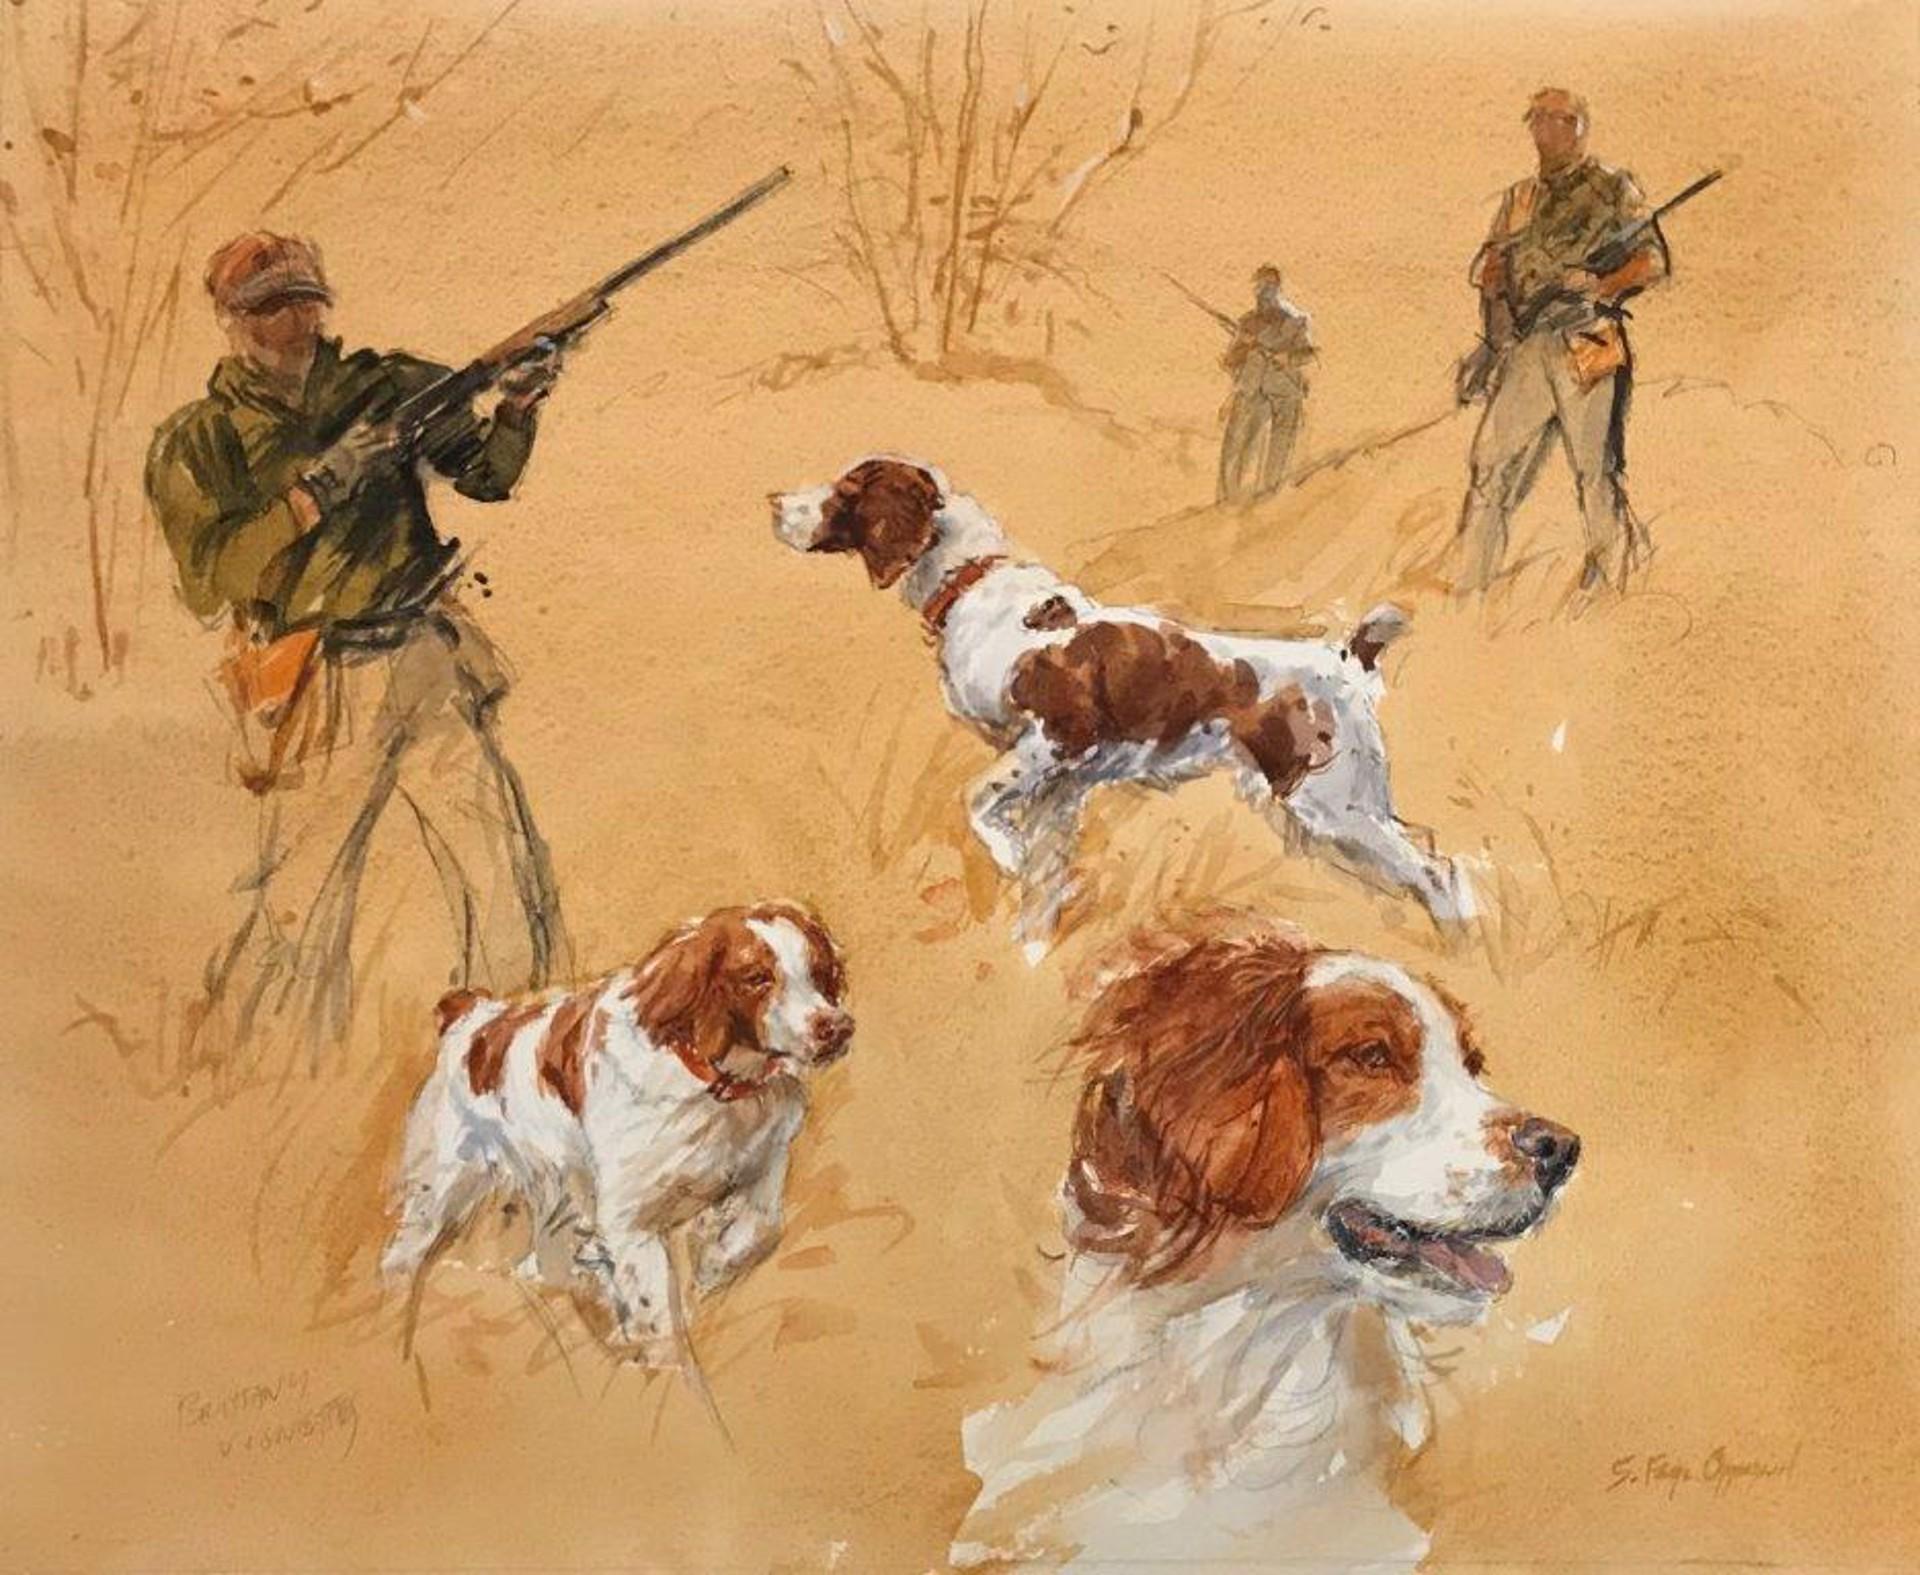 Sandra Oppegard Portrait Painting – The Contemporary Vignette of a Hunter and his Brittany Spaniel's Day in the Field